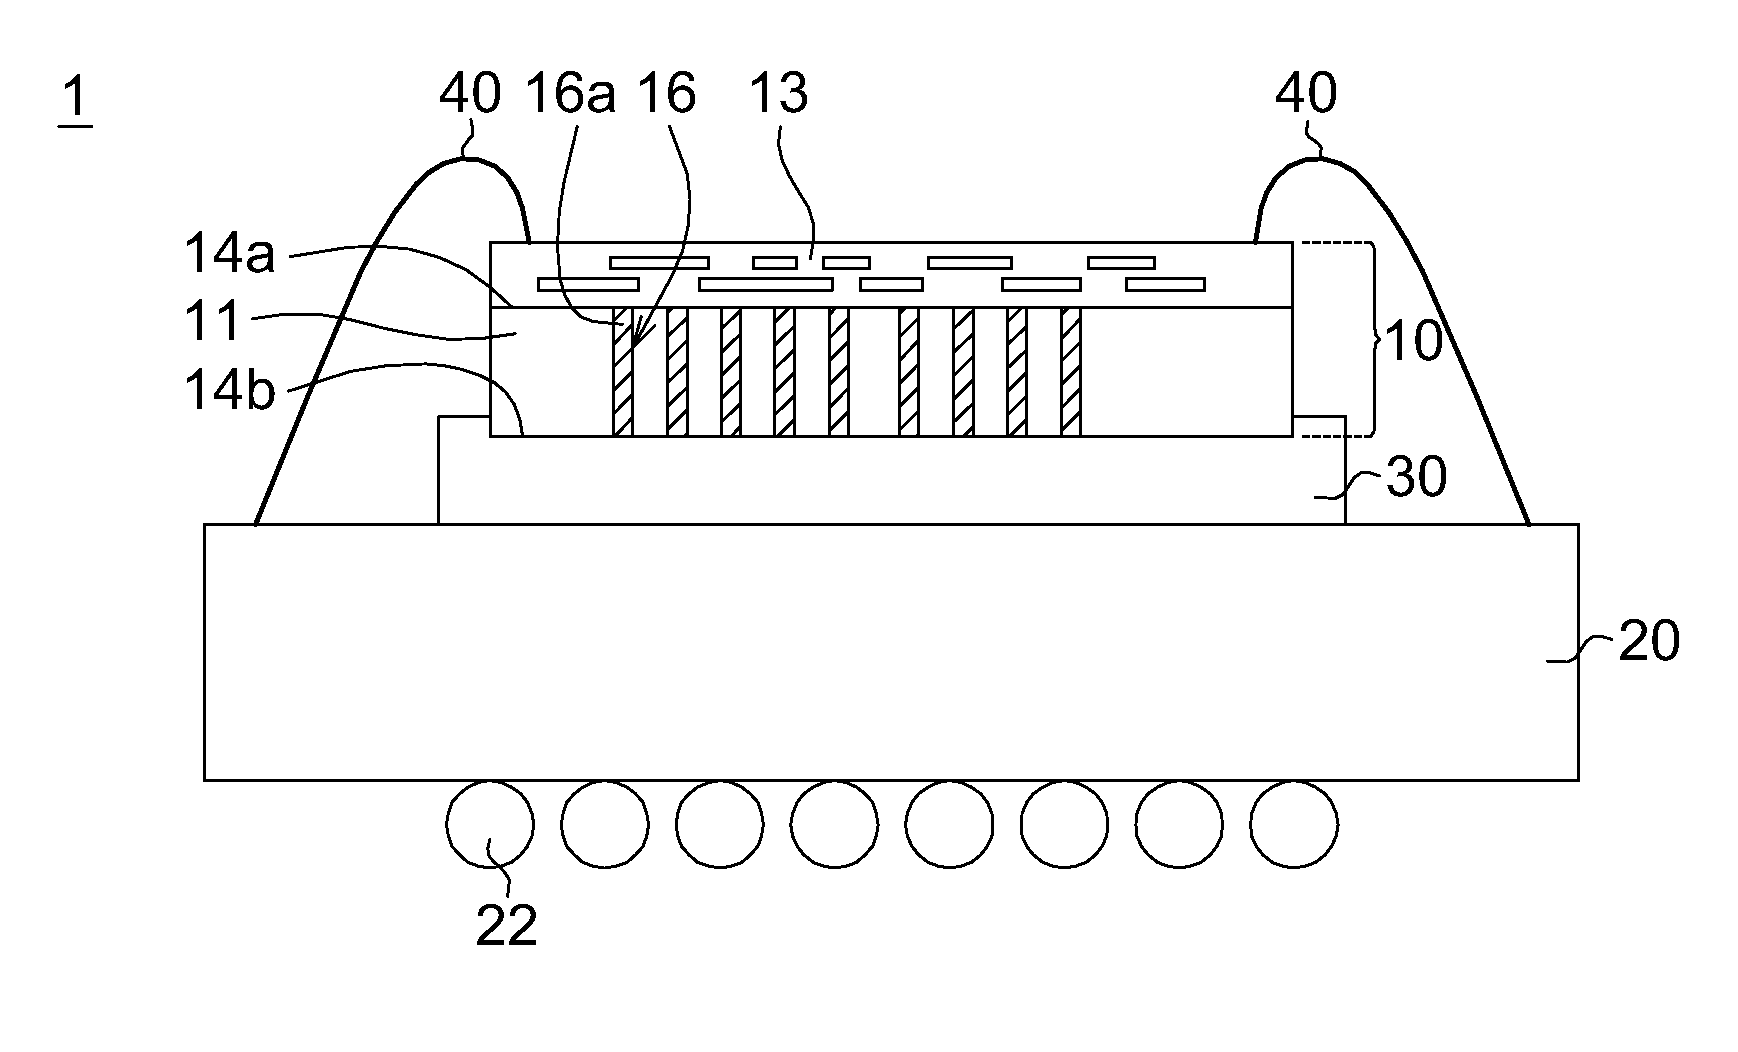 Package structure having silicon through vias connected to ground potential